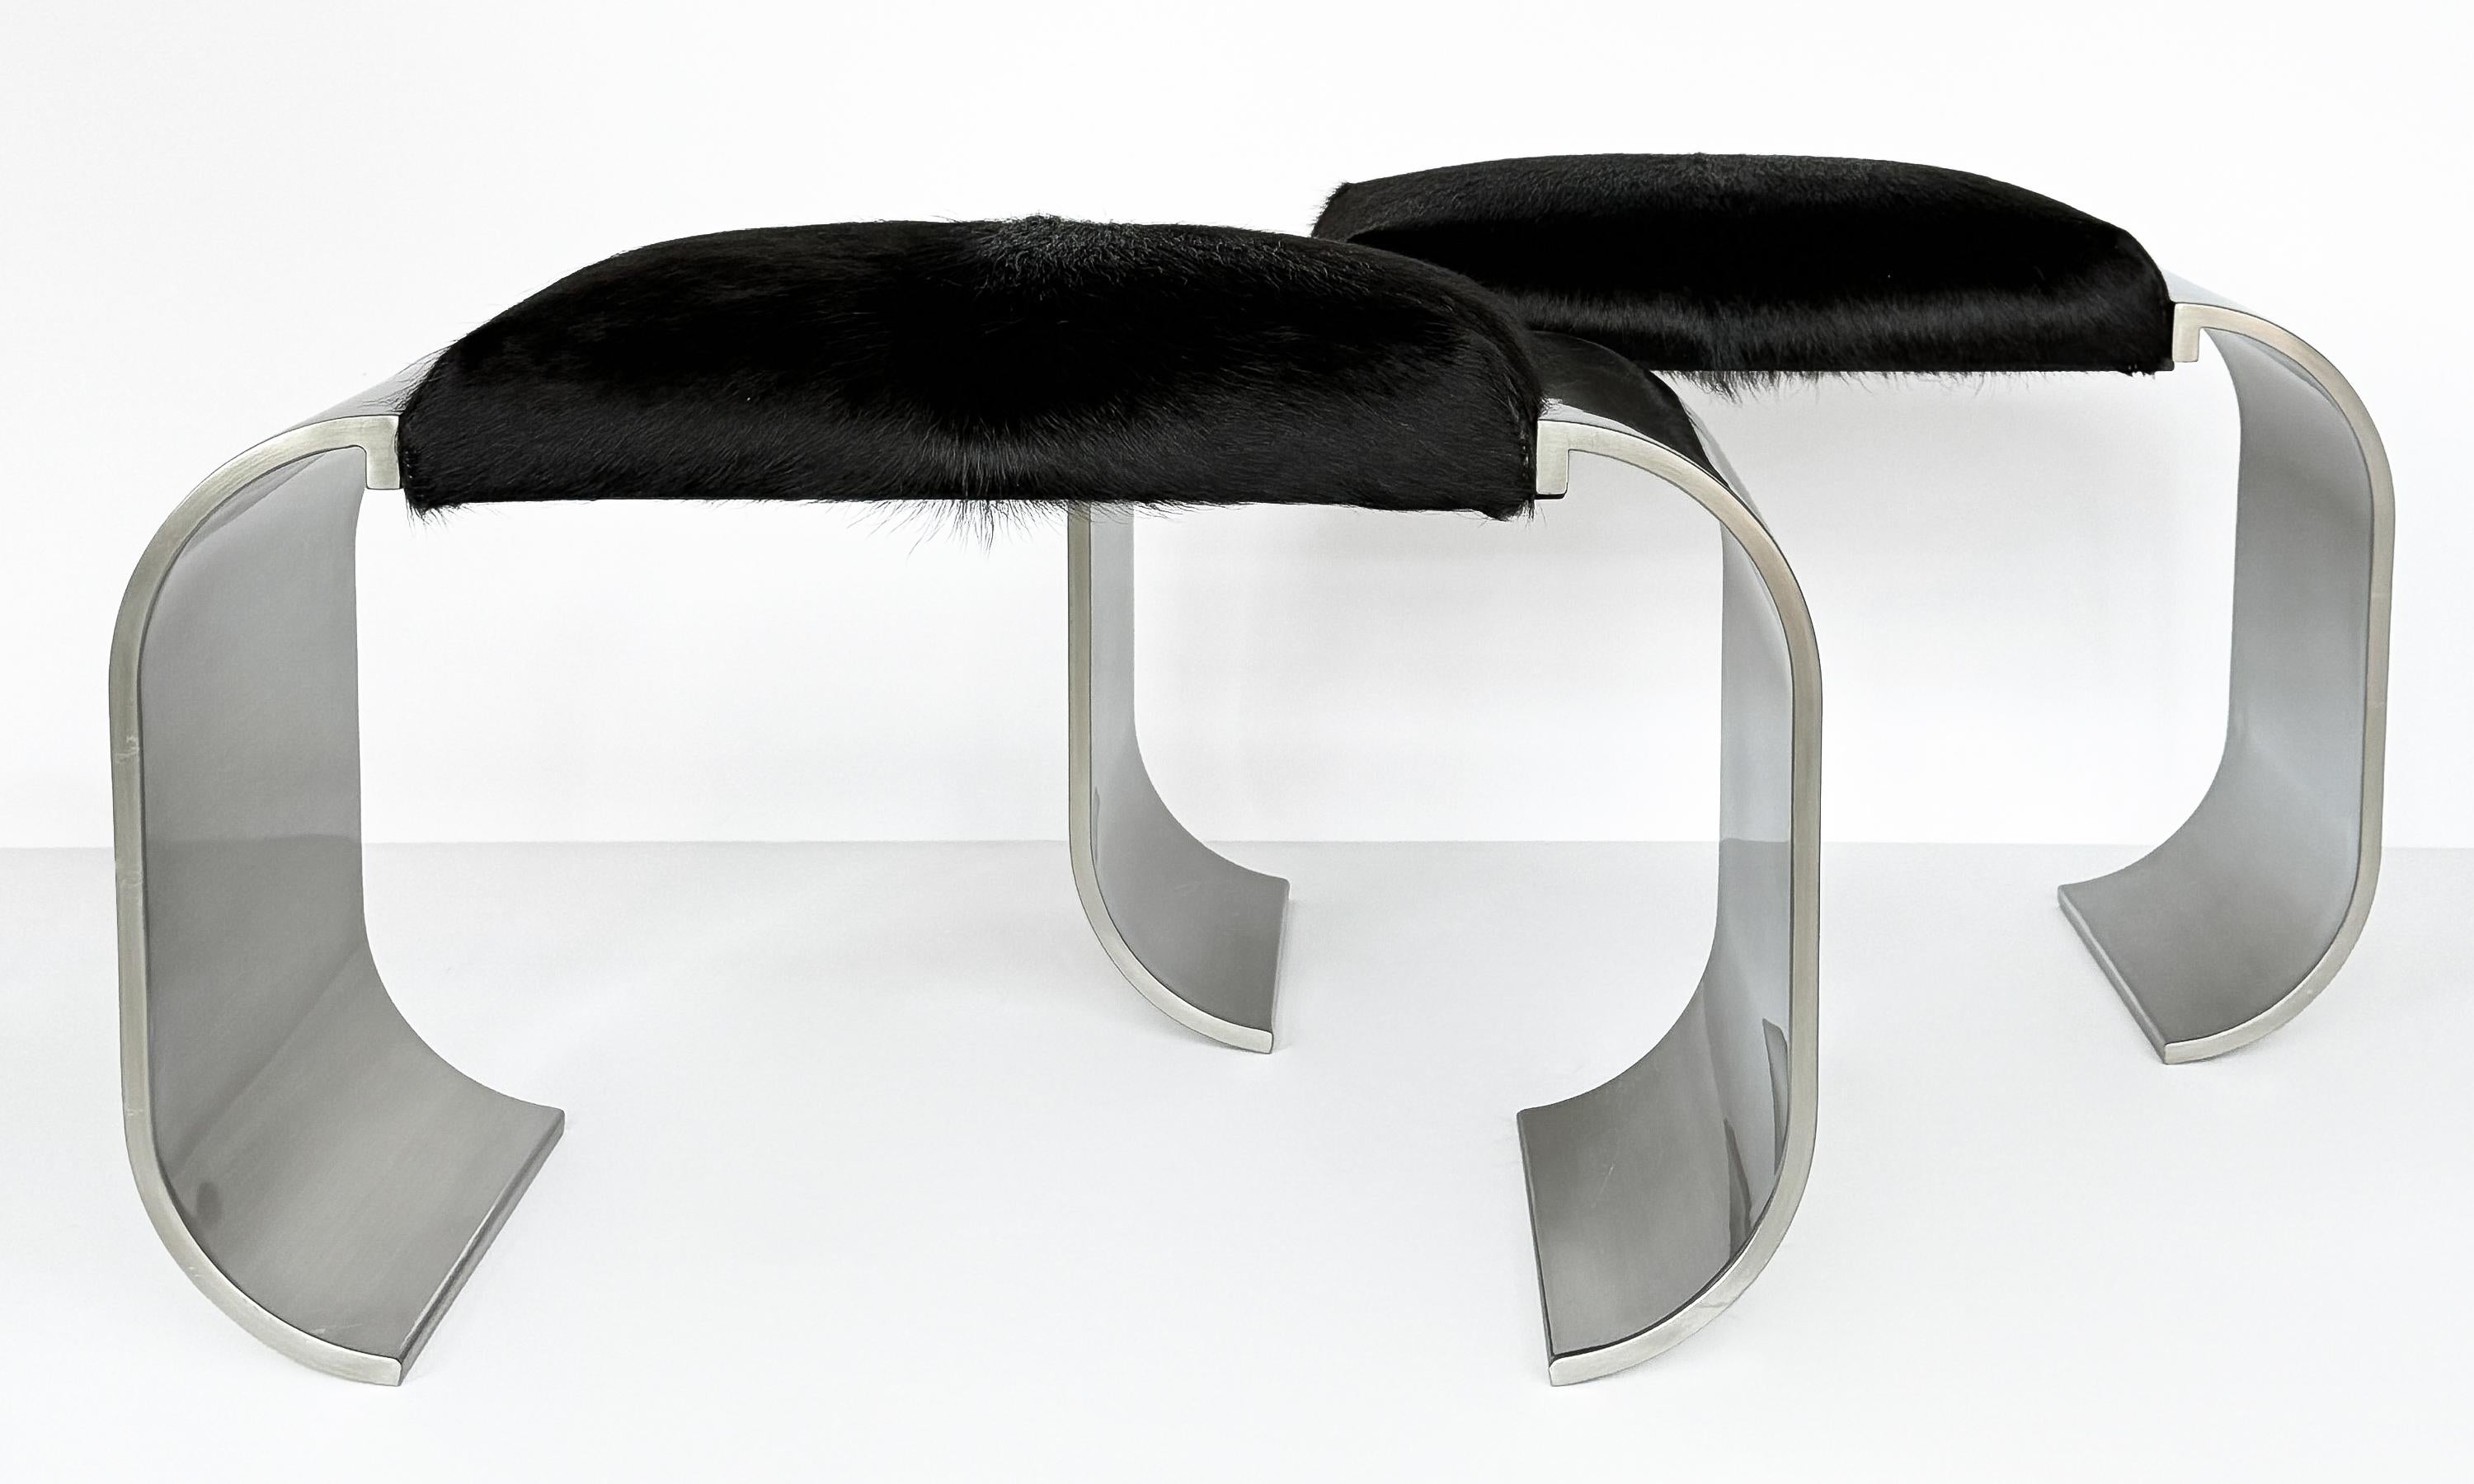 
This pair of “Macao” benches / ottomans by Stanley Jay Friedman for Brueton is a striking example of the seamless fusion of form and function that characterizes 1970s American design. Crafted with the durability and luster of thick stainless steel,